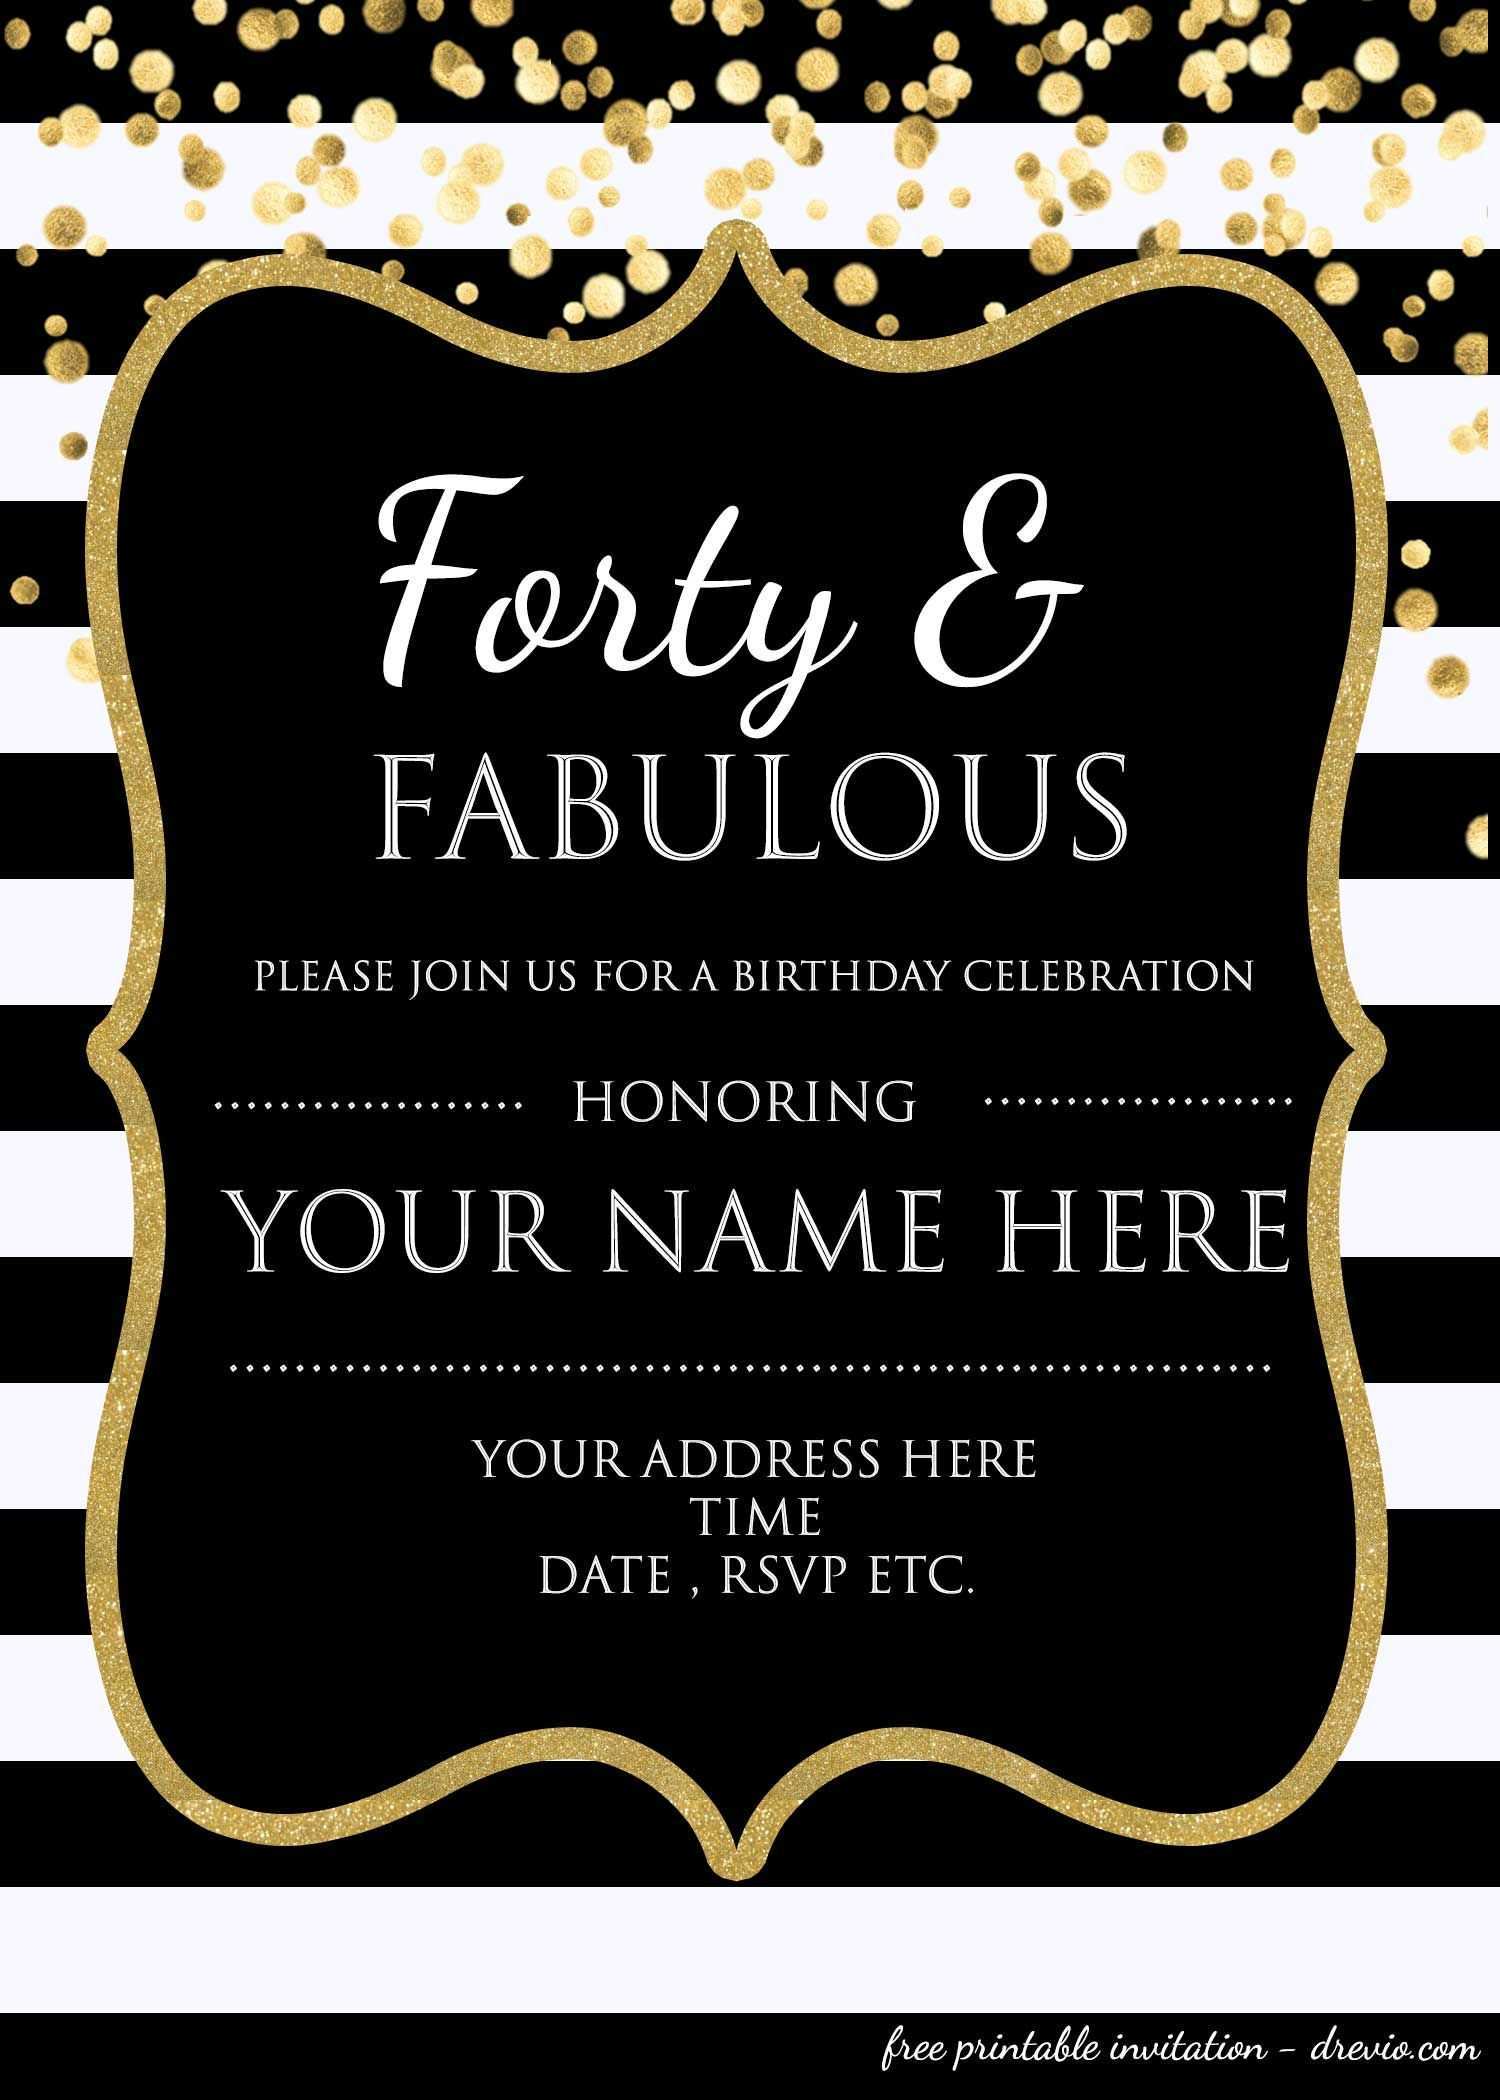 16 Free Printable Party Invitation Template Photoshop Download for Party Invitation Template Photoshop